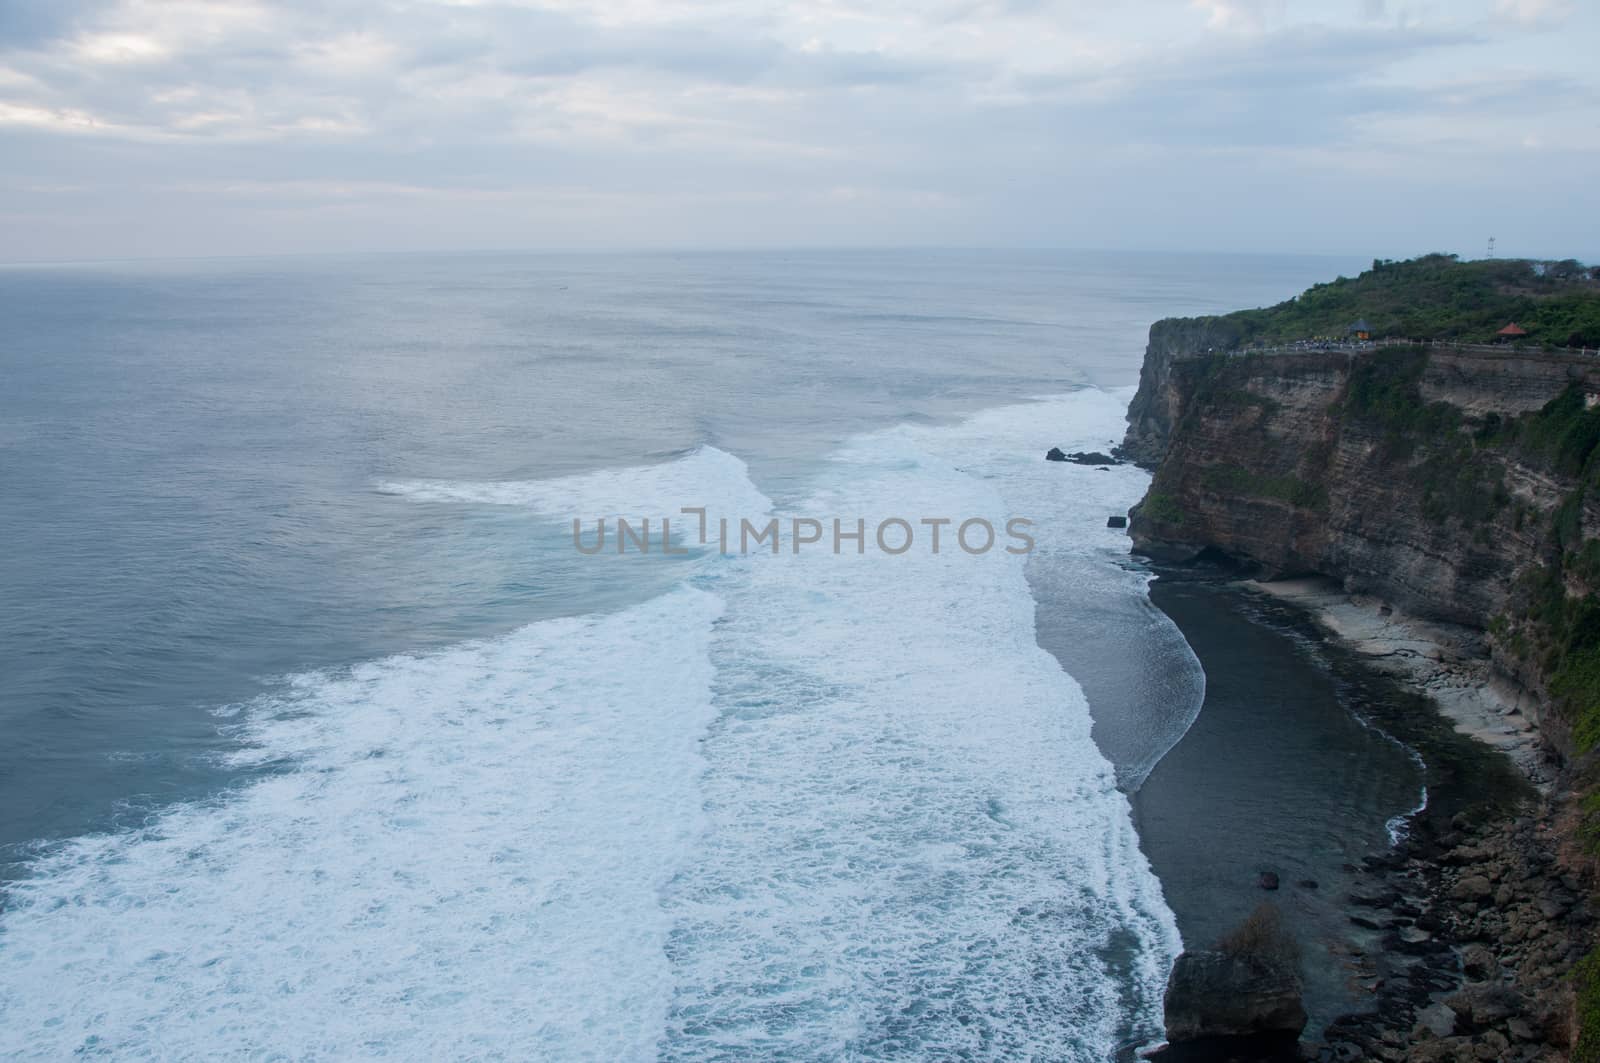 High big clift with stunning beach in Bali by eyeofpaul